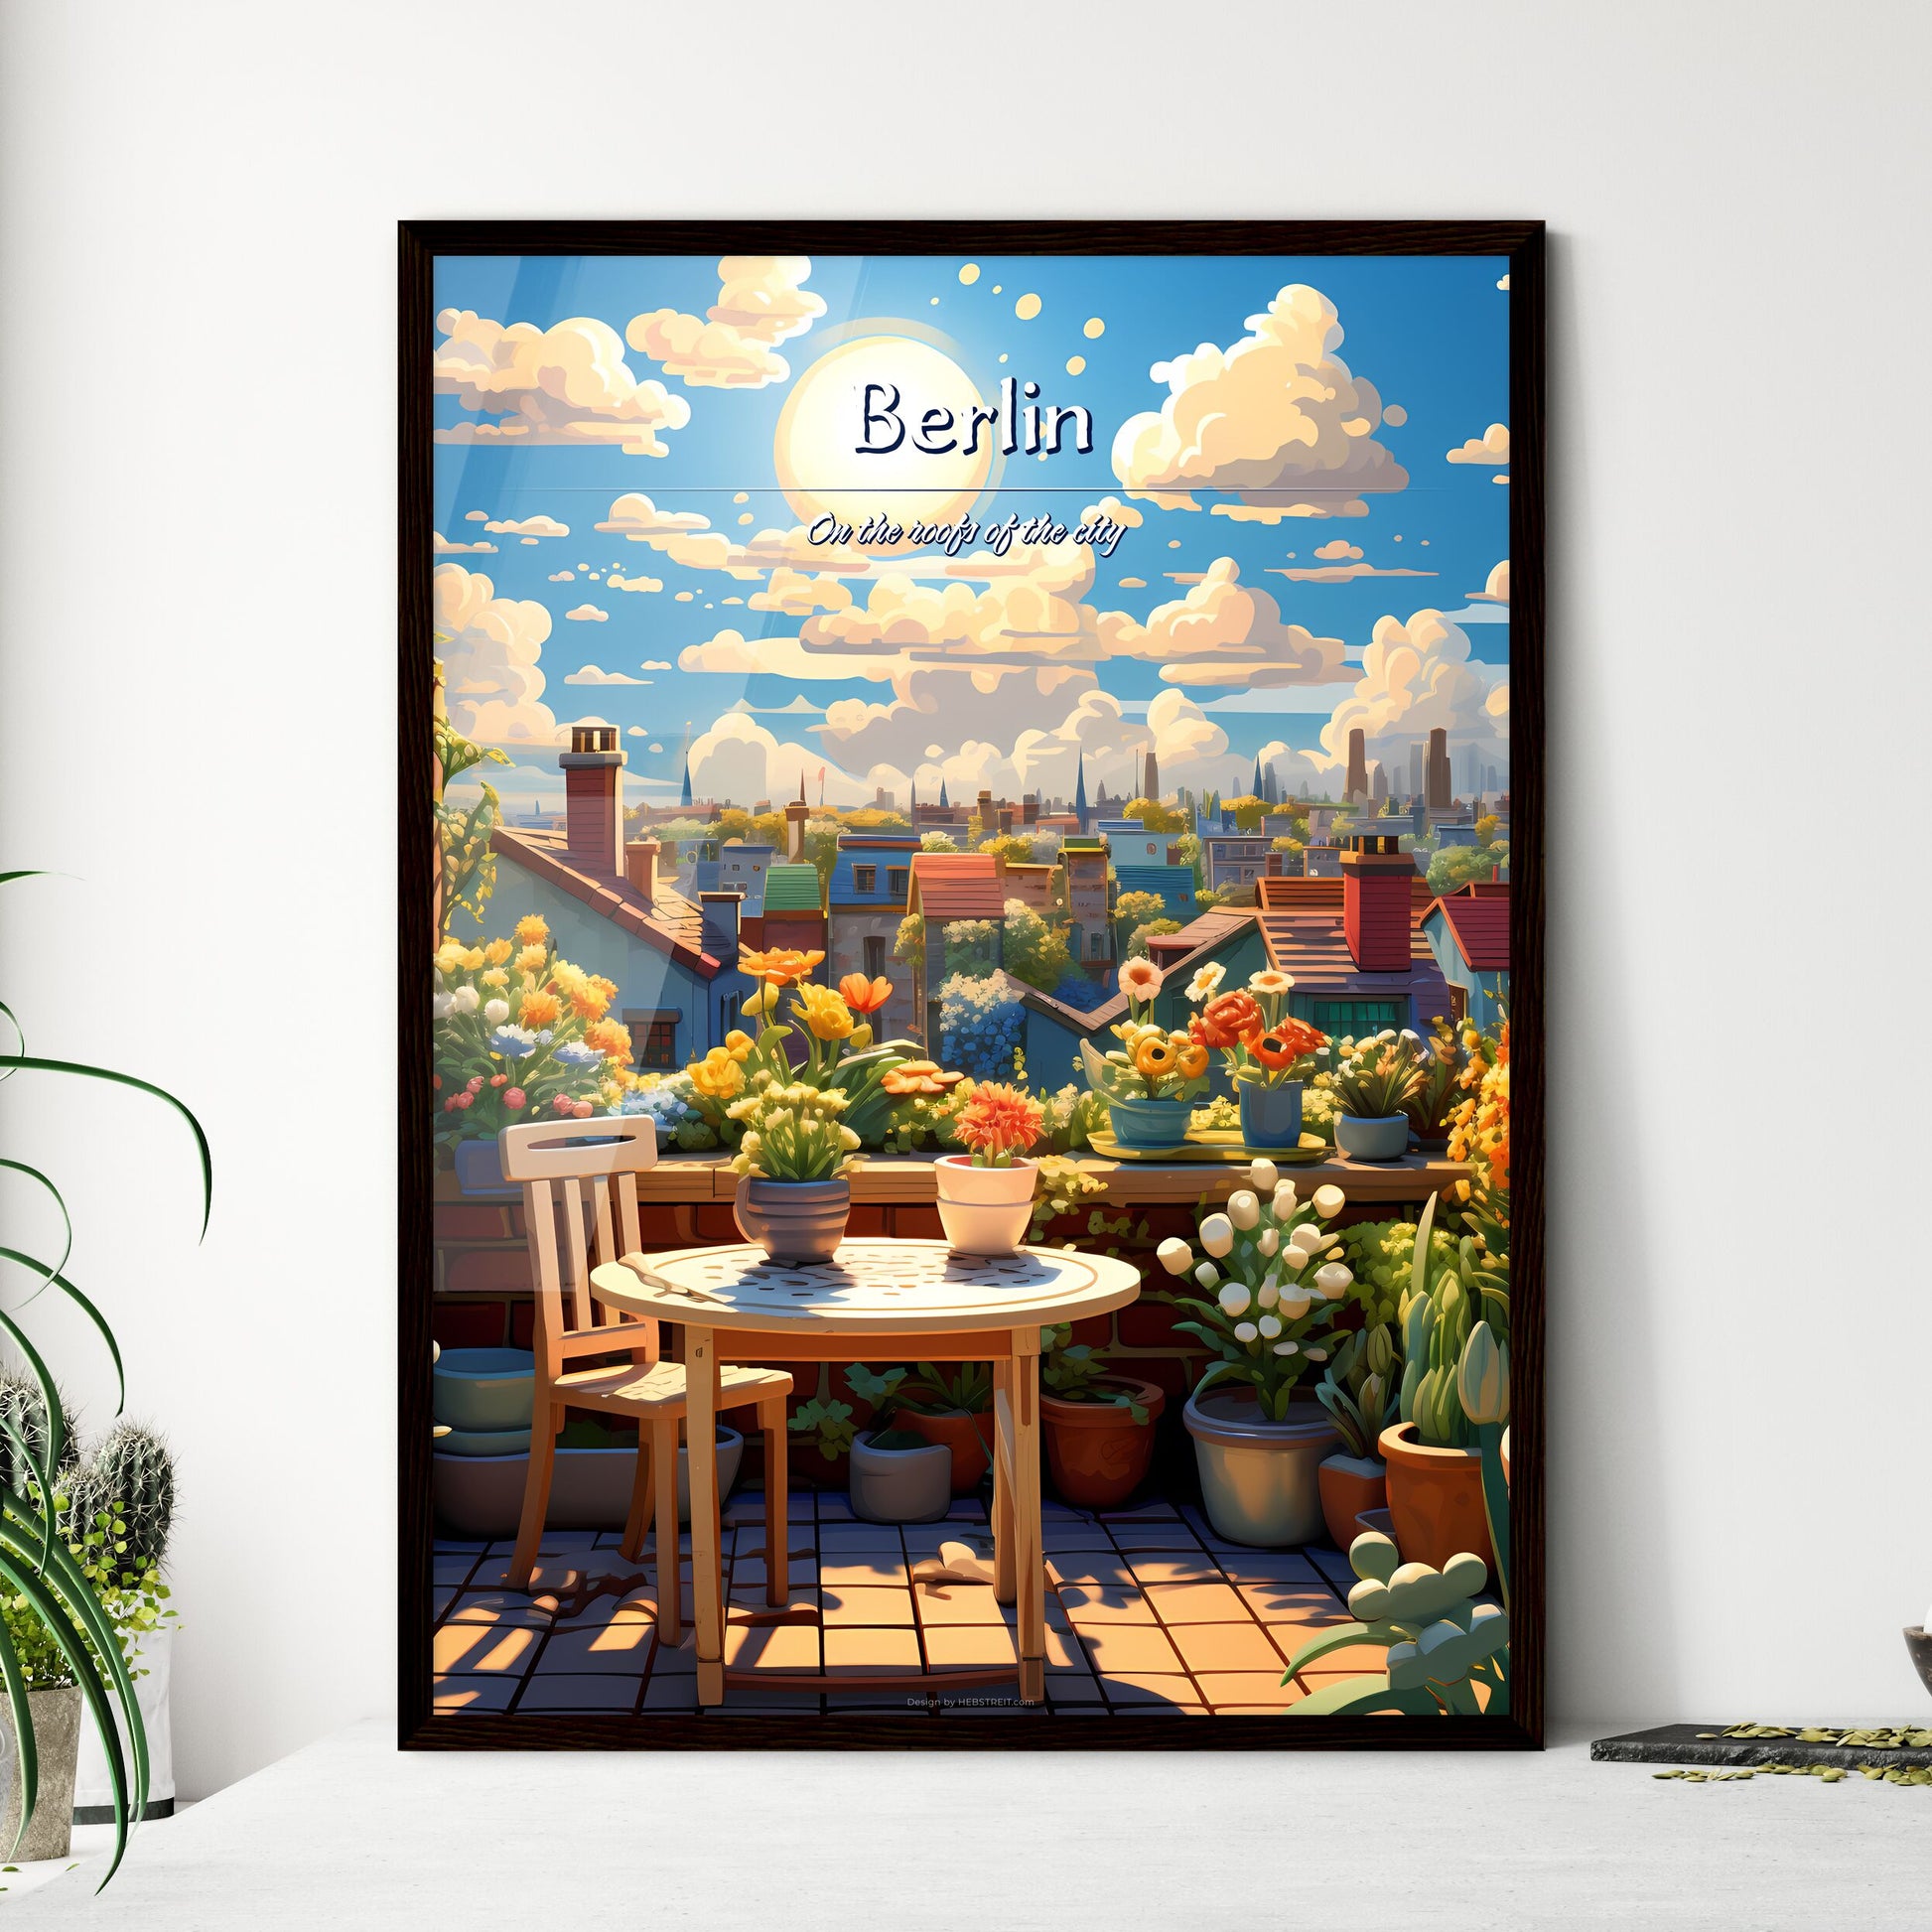 On the roofs of Berlin - Art print of a woman in a red dress Default Title